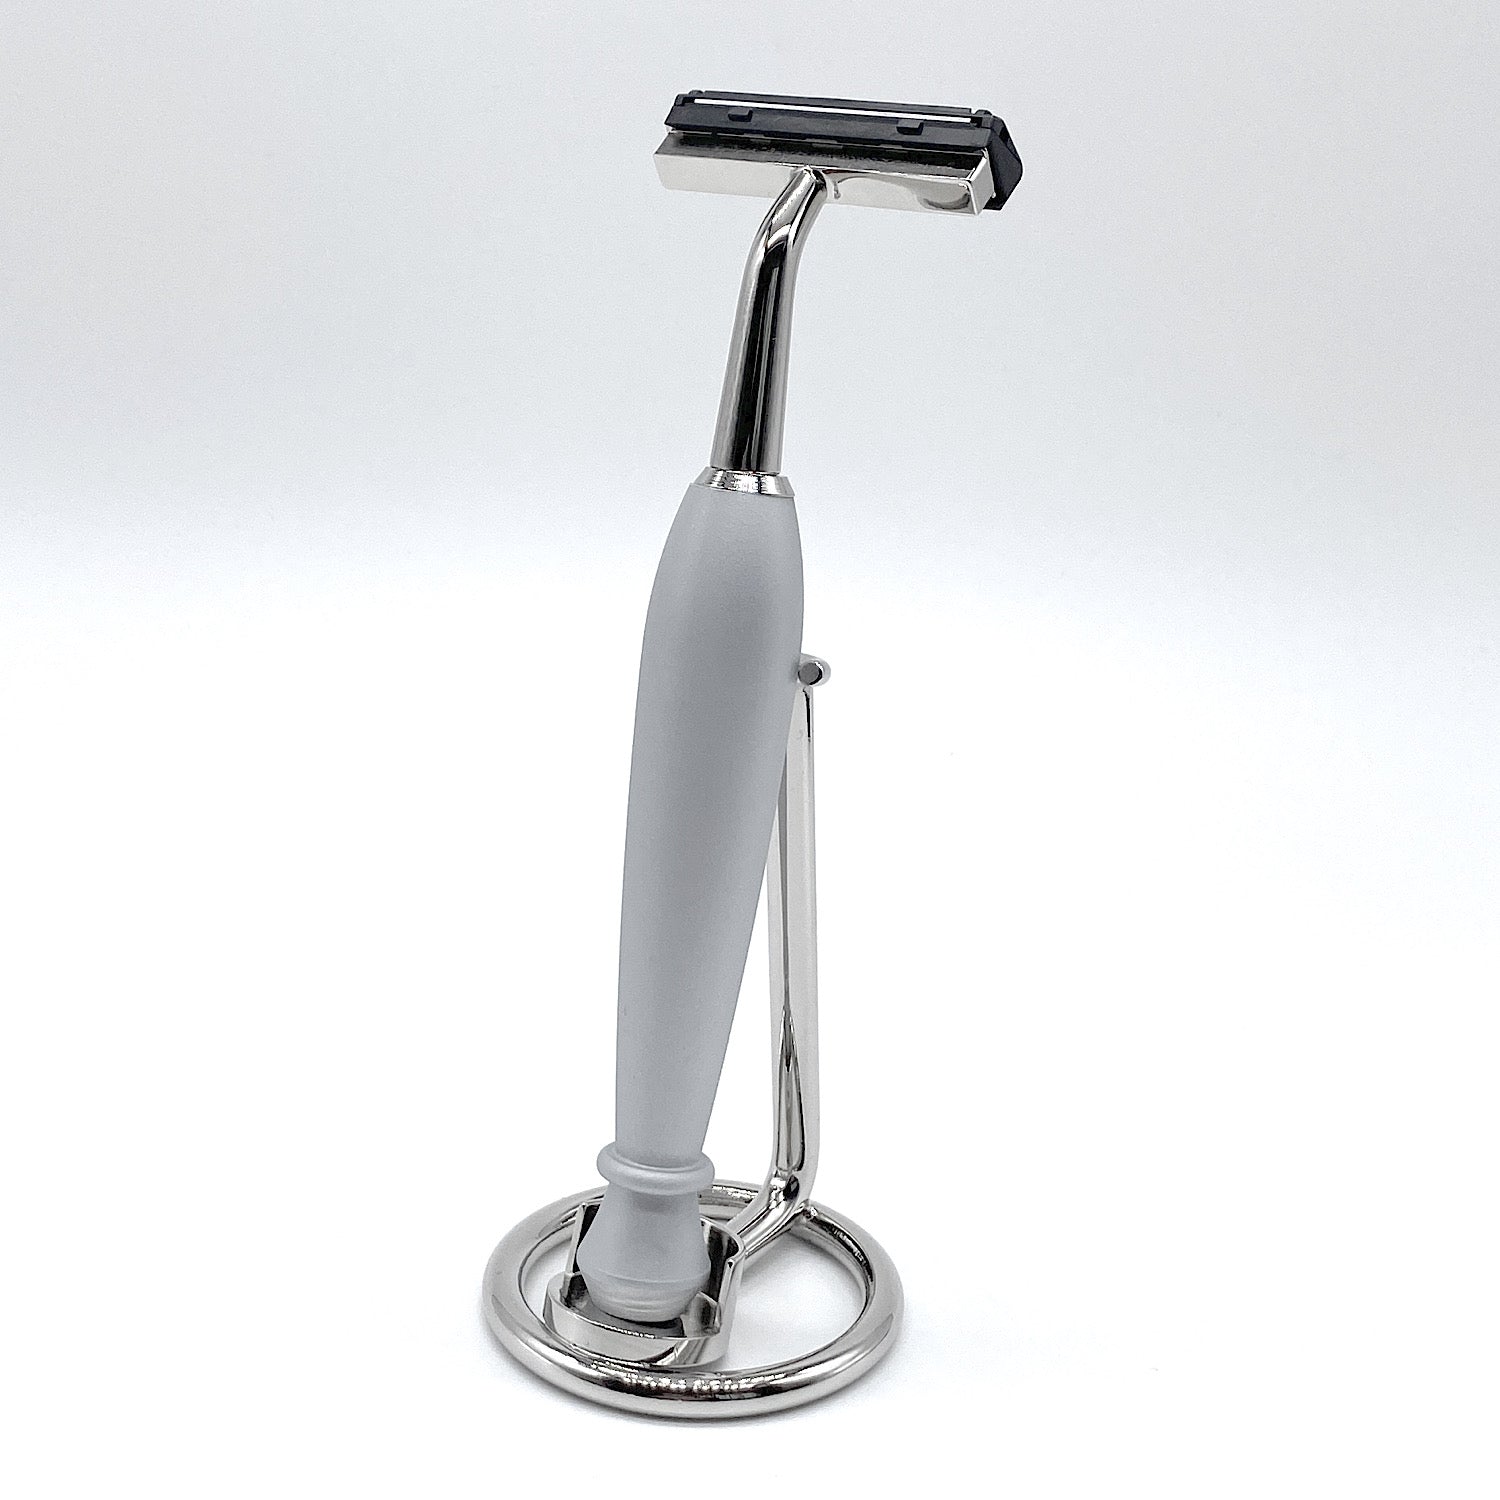 2in1 razor / RA350T OLD FLORENCE ORIGIO A recommended gift item that can use both the classical two -blade and the latest 5 -blade